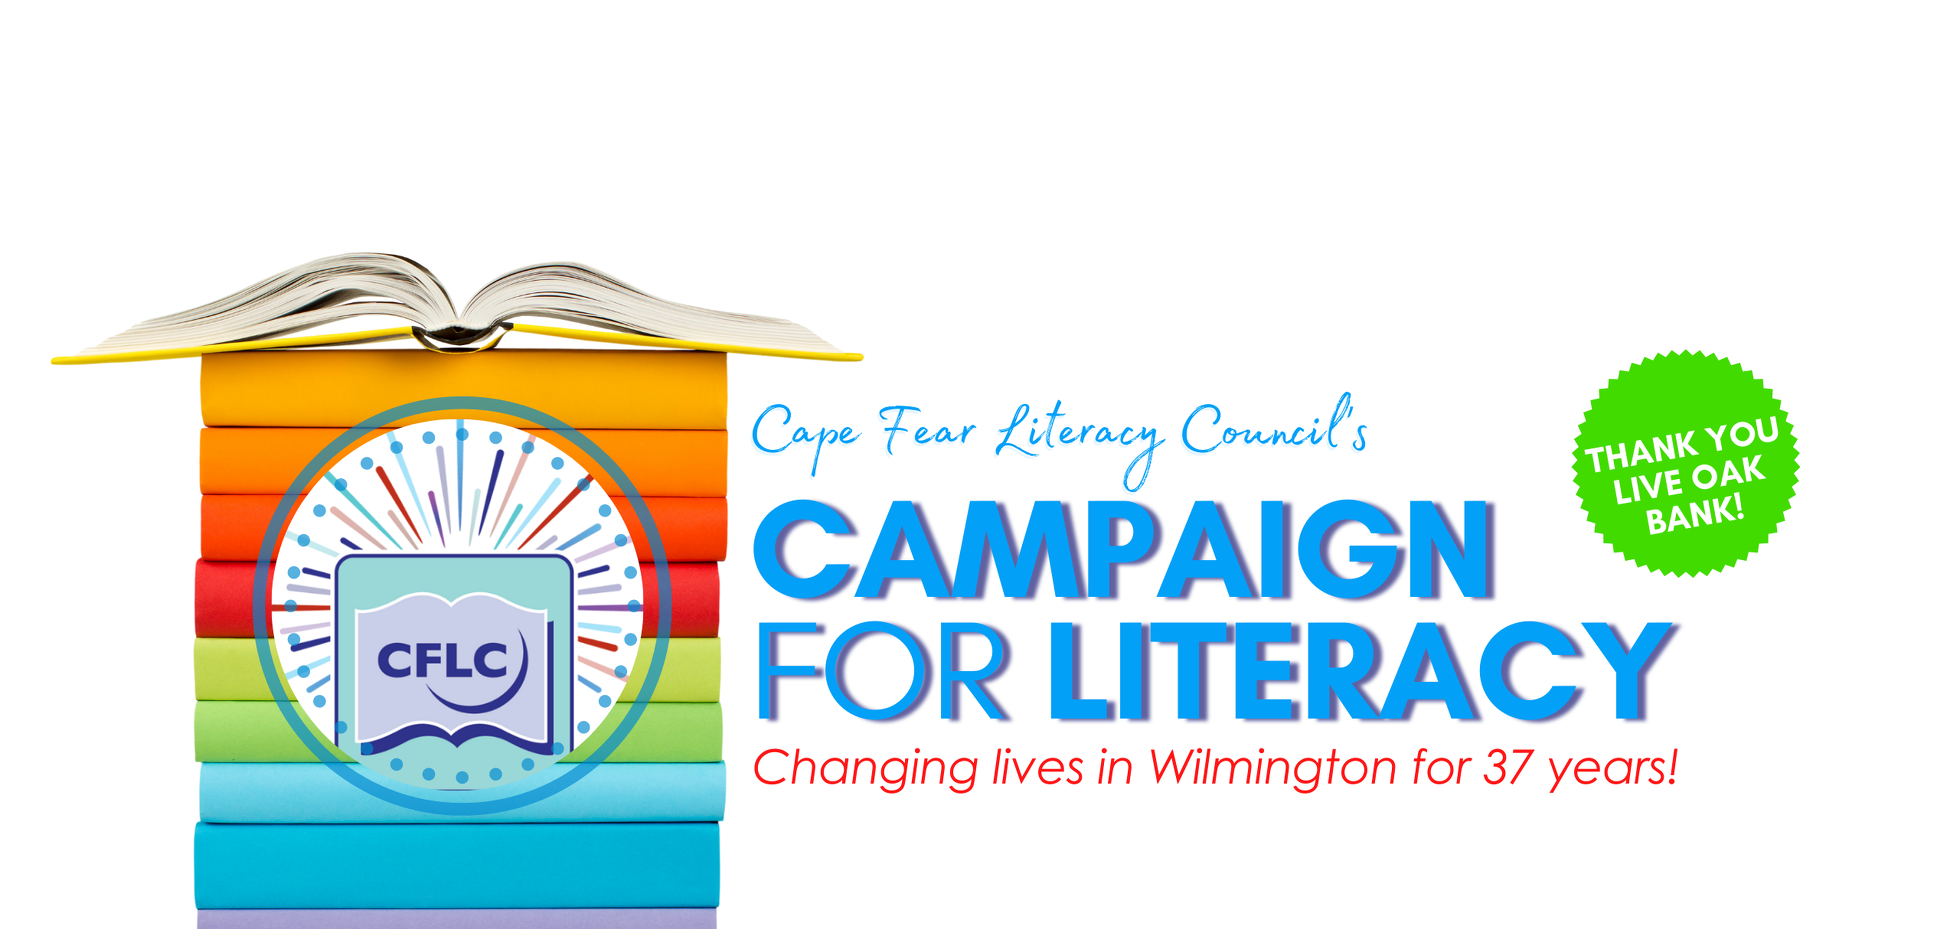 CFLC's Campaign for Literacy